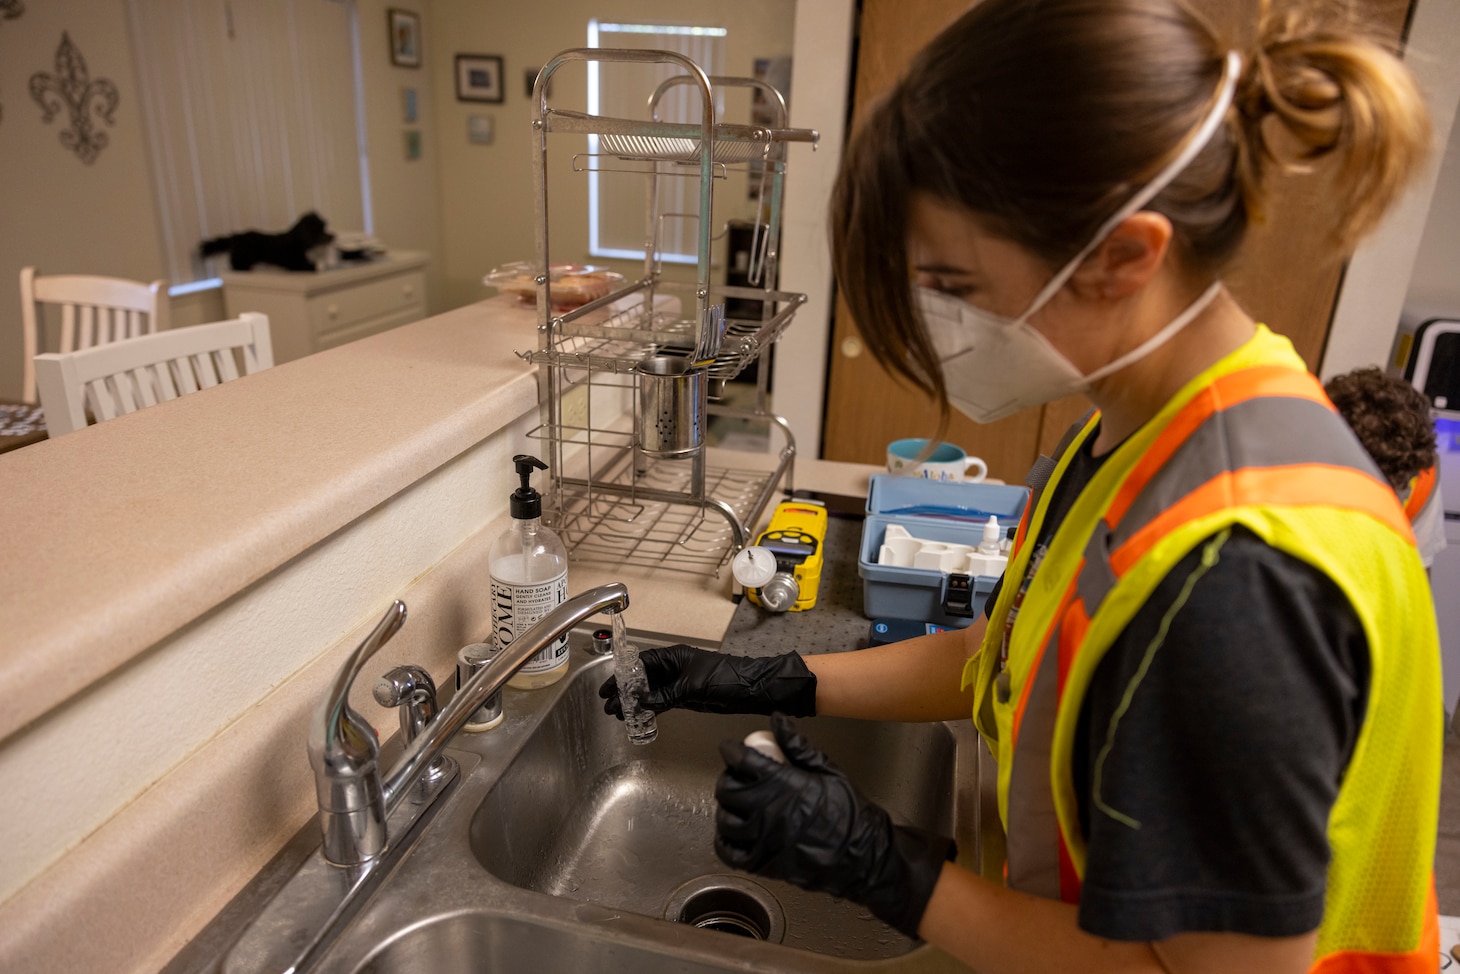 Hannah Brumby, a Navy contractor, collects water samples as part of the Navy’s Drinking Water Long-Term Monitoring program in Honolulu, Hawaii, Feb. 13.